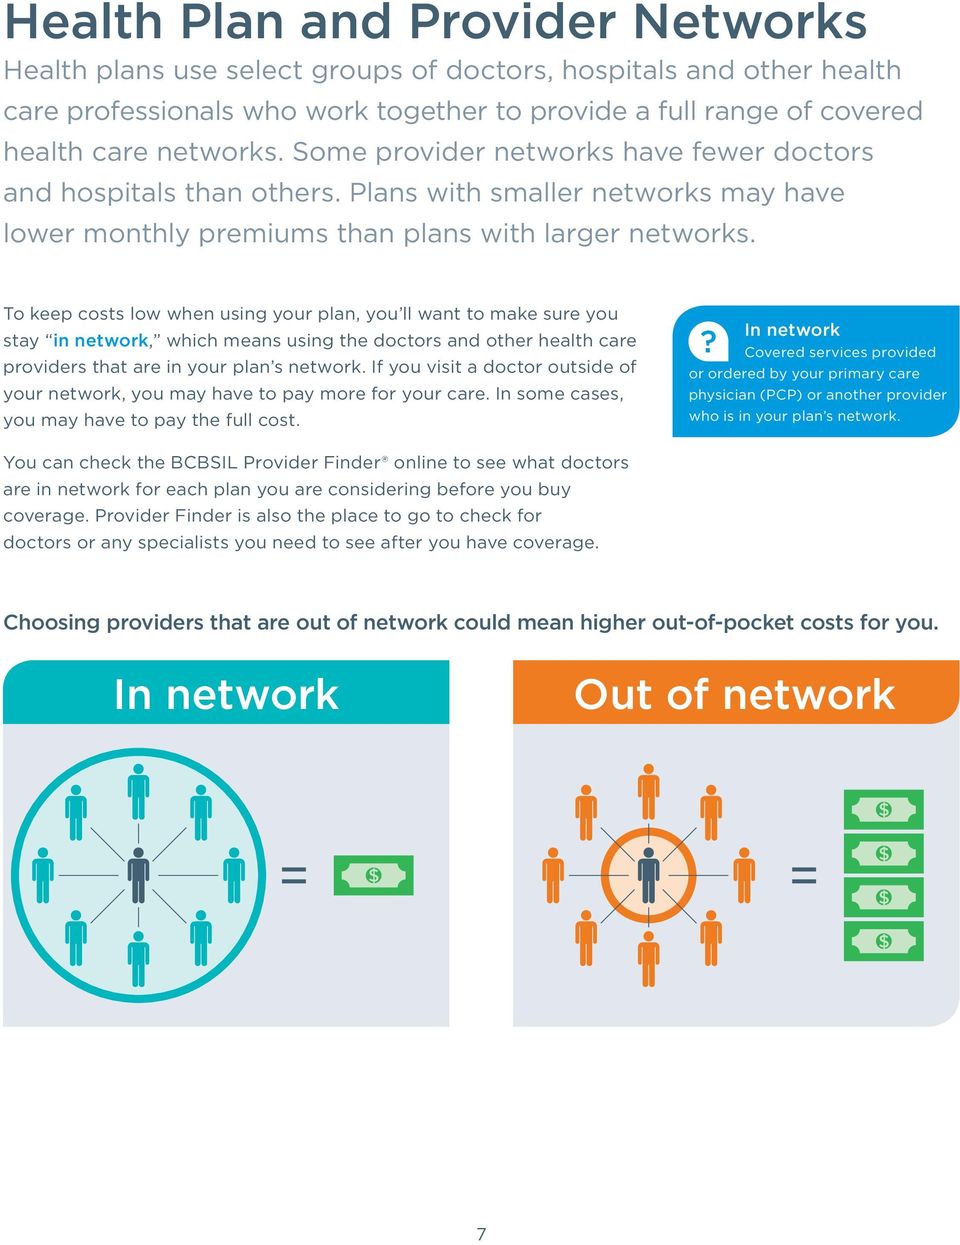 To keep costs low when using your plan, you ll want to make sure you stay in network, which means using the doctors and other health care providers that are in your plan s network.